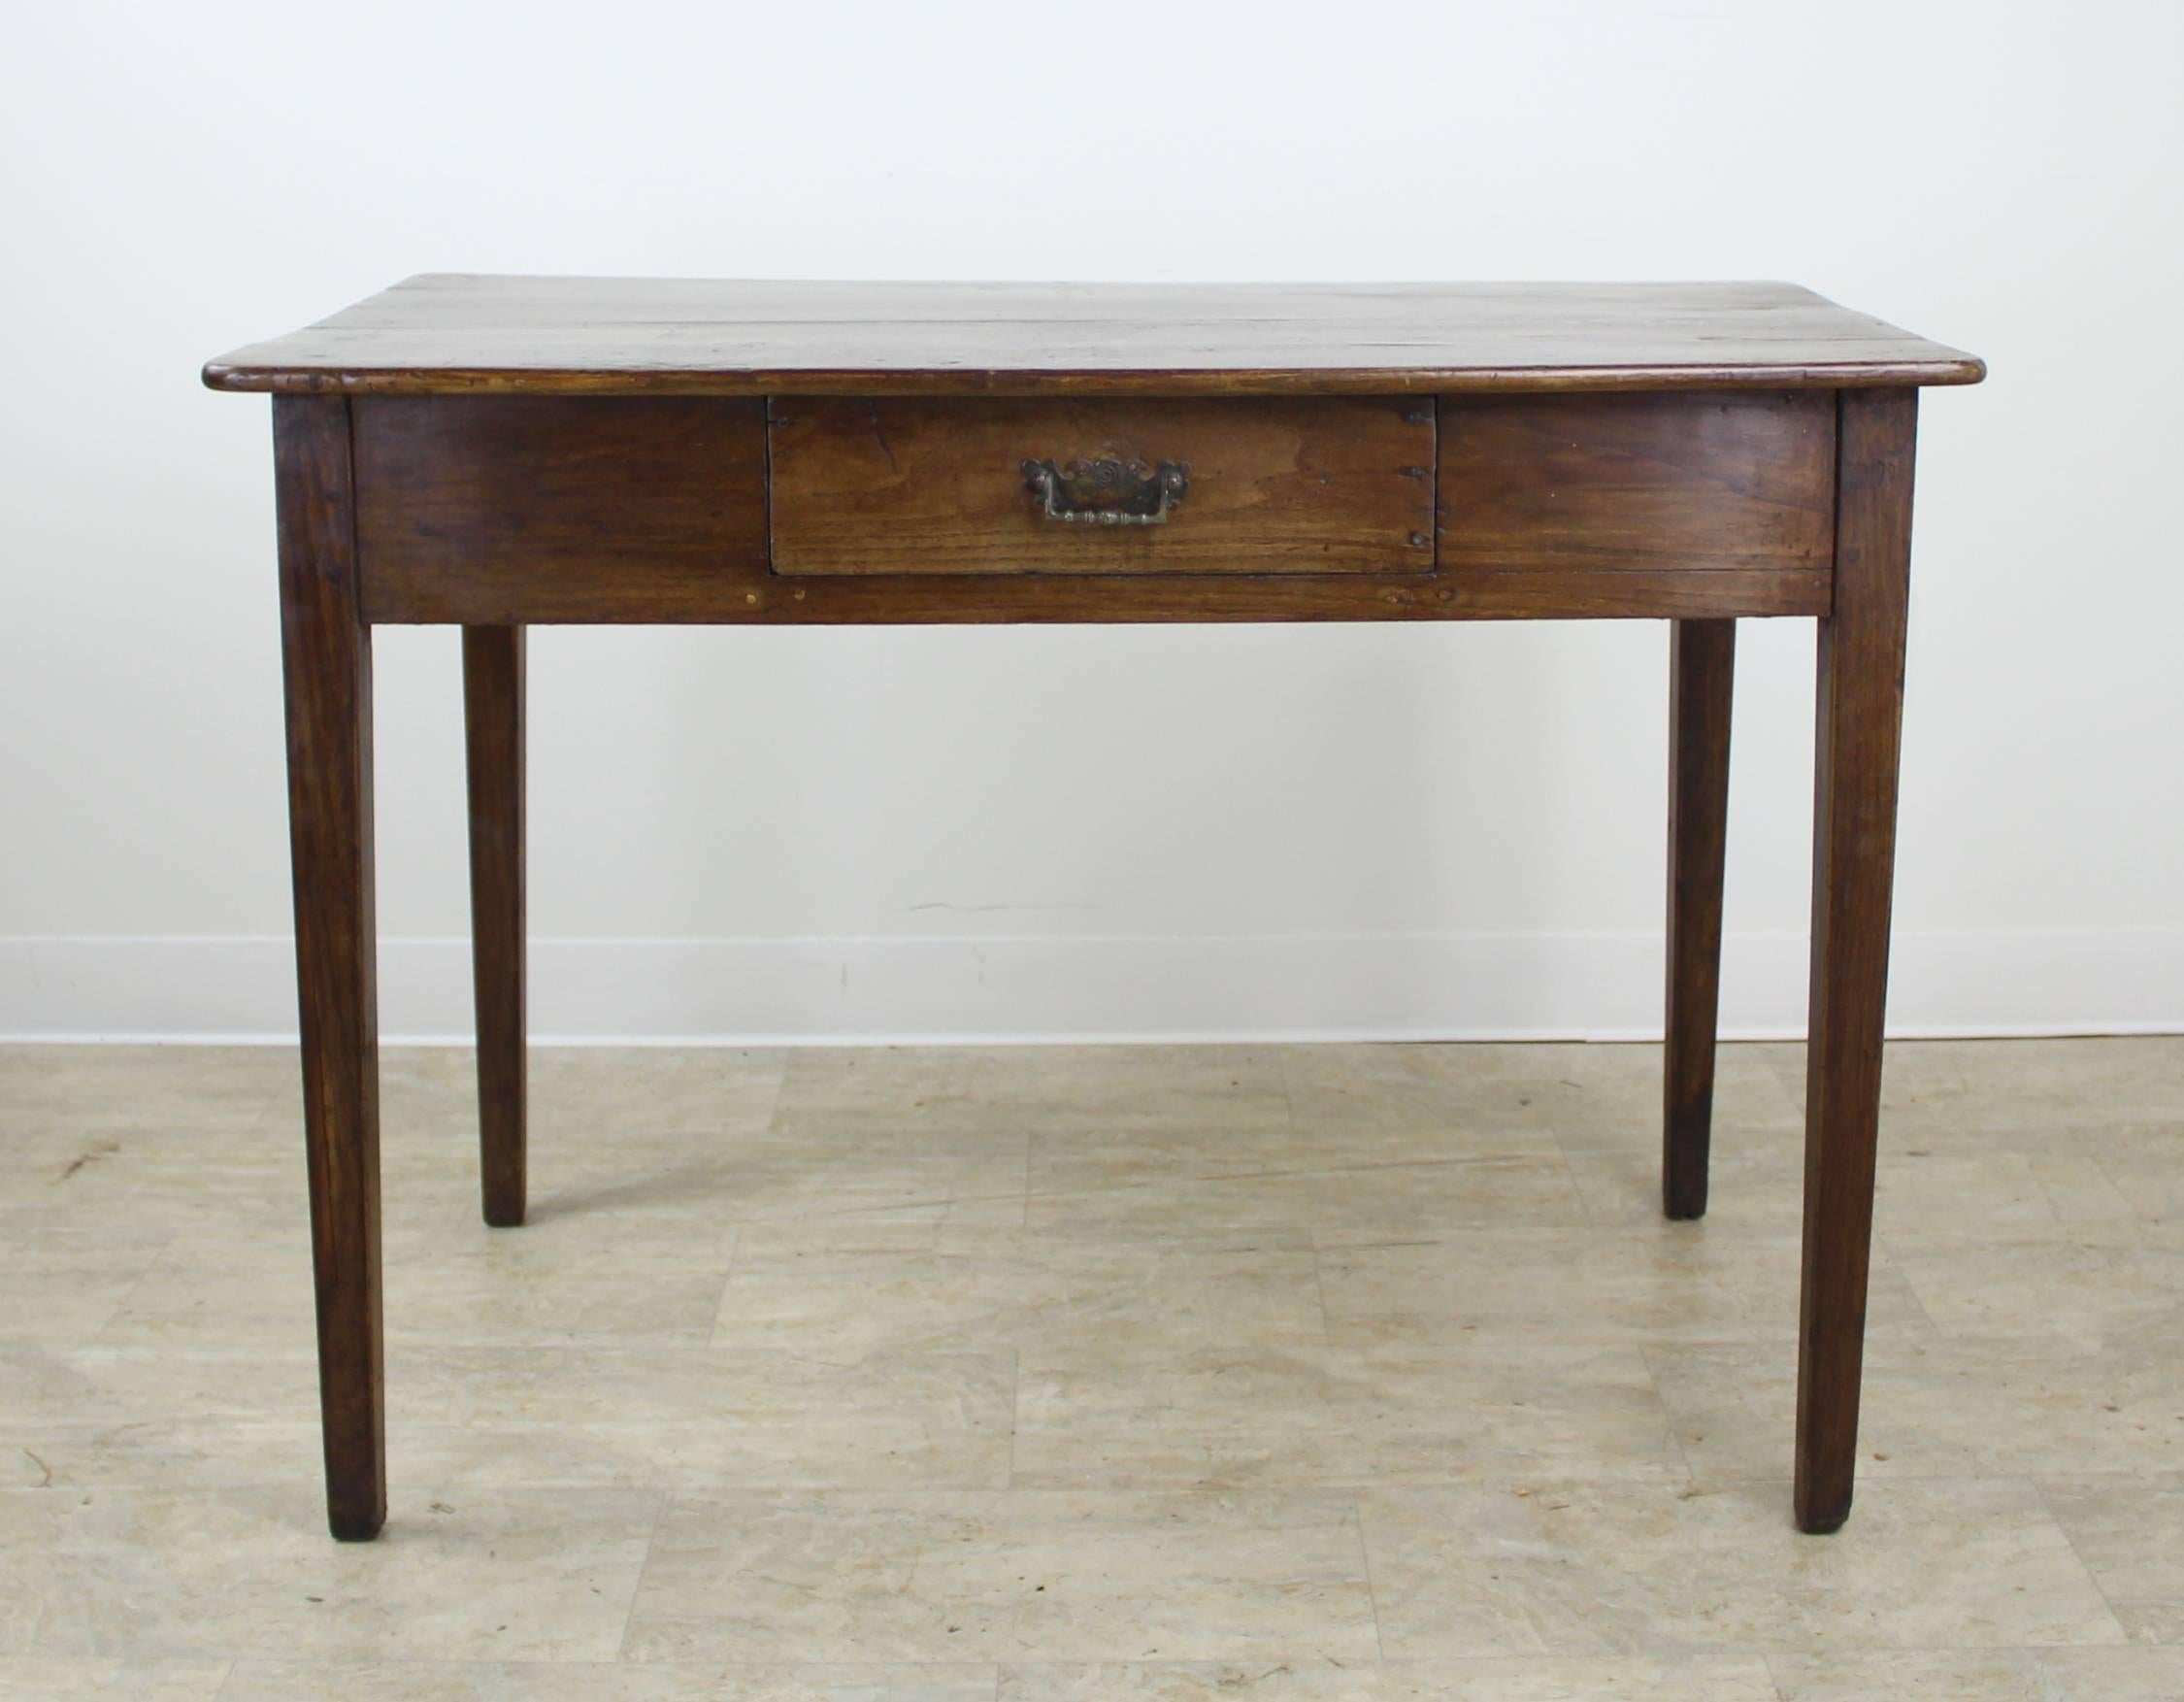 French Antique Oak Writing Table with Decorative Drawer Pull